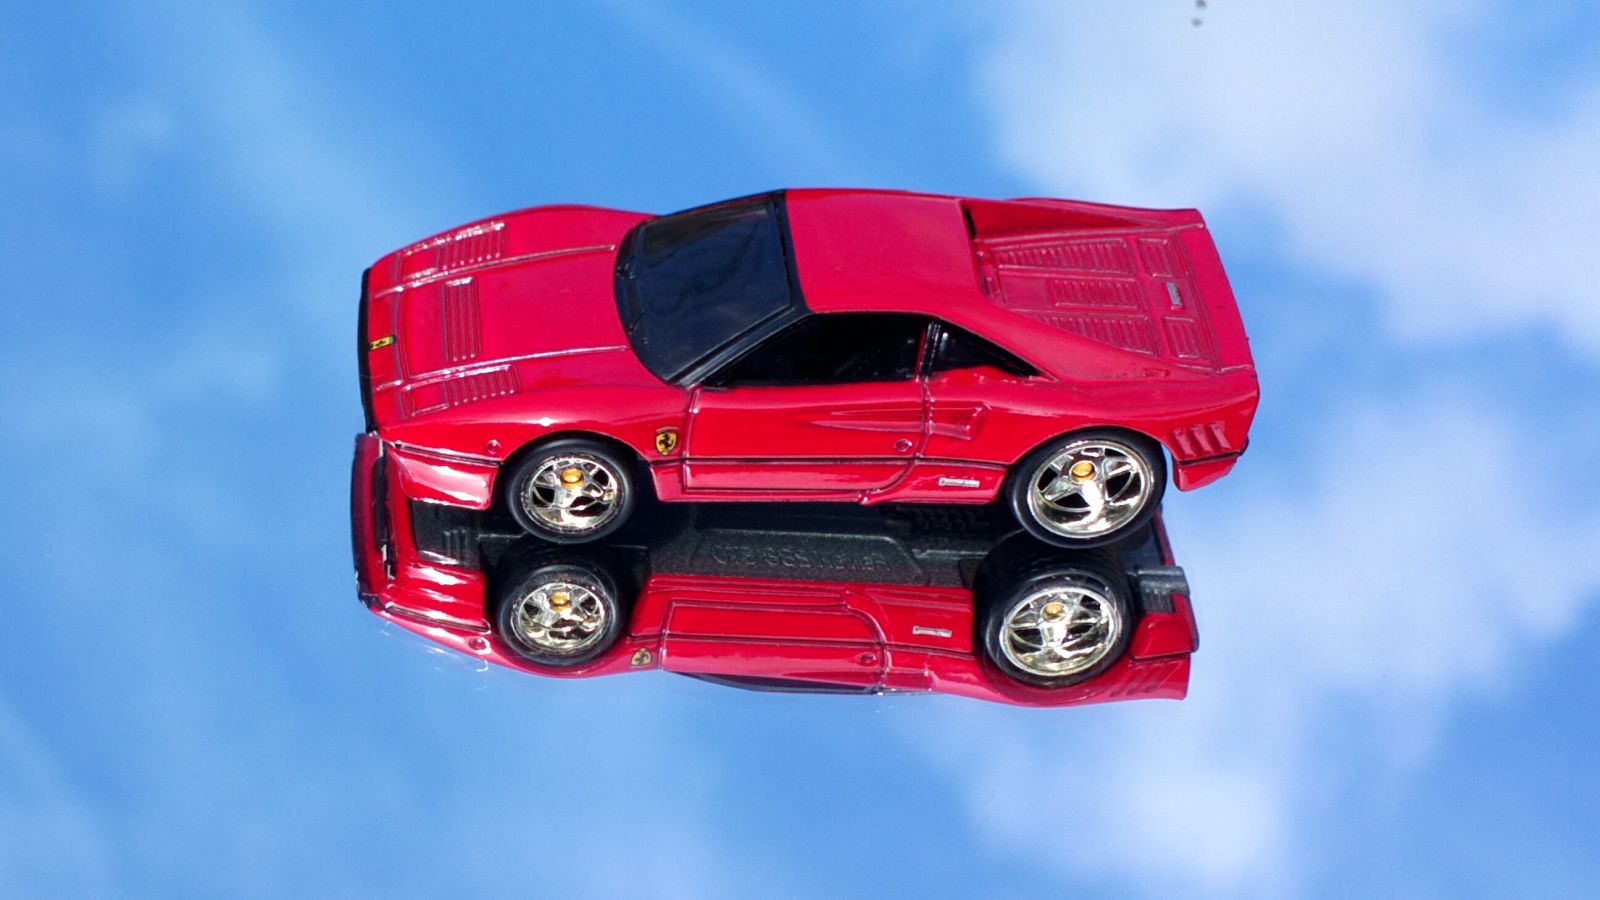 Illustration for article titled LaLD car week - A red streak in the sky